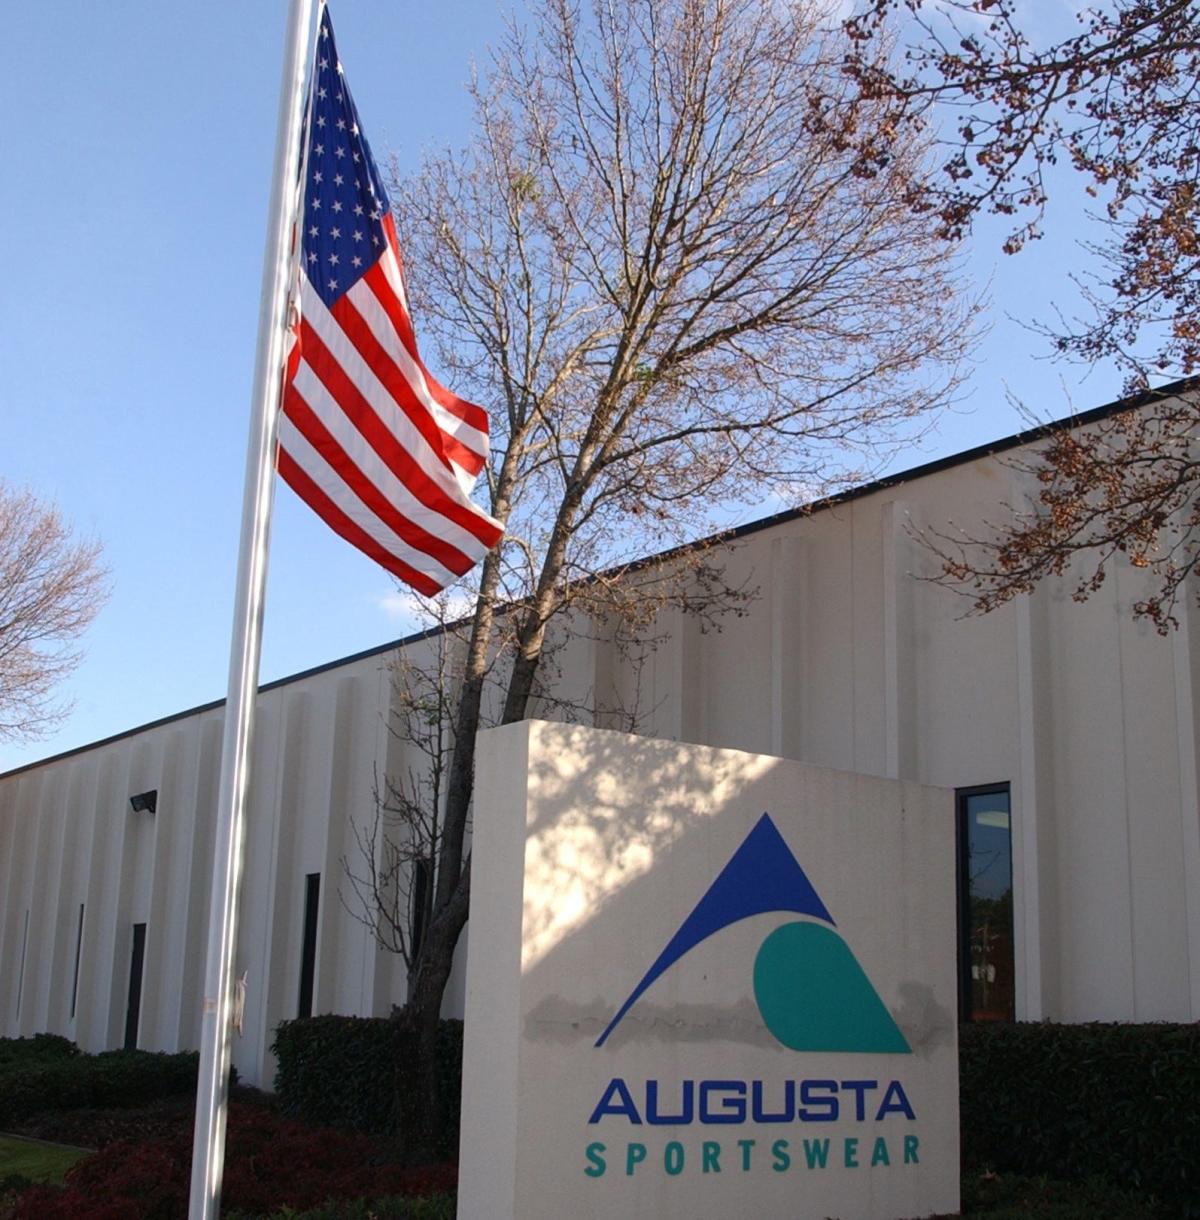 Augusta Sportswear Group acquired by new equity owner to help